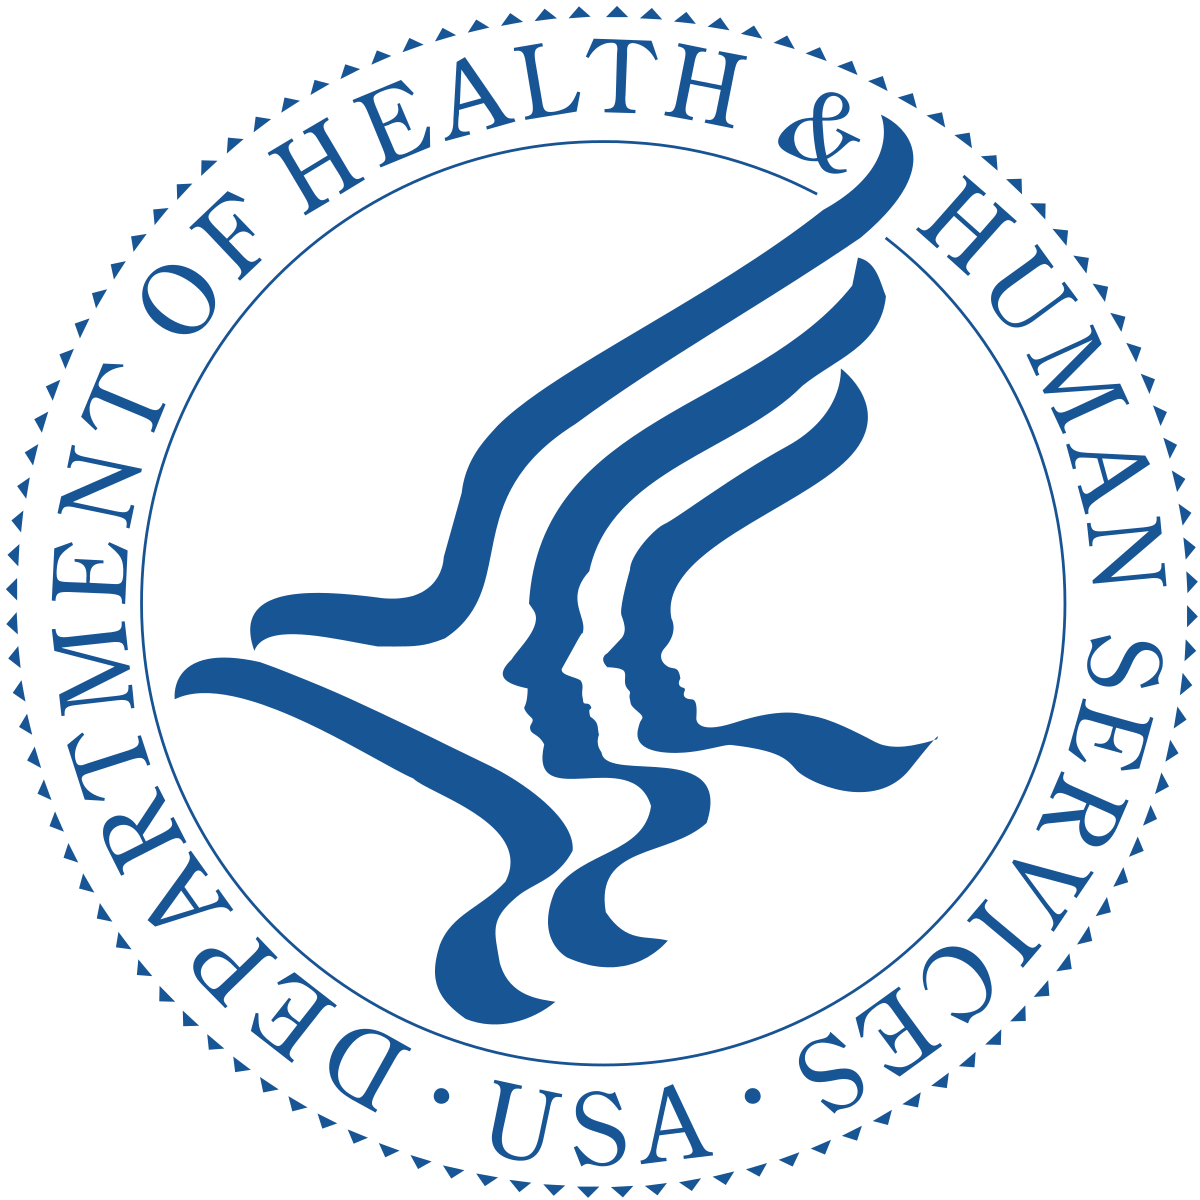 News: $65 Million Awarded for Maternal Services By HHS Department